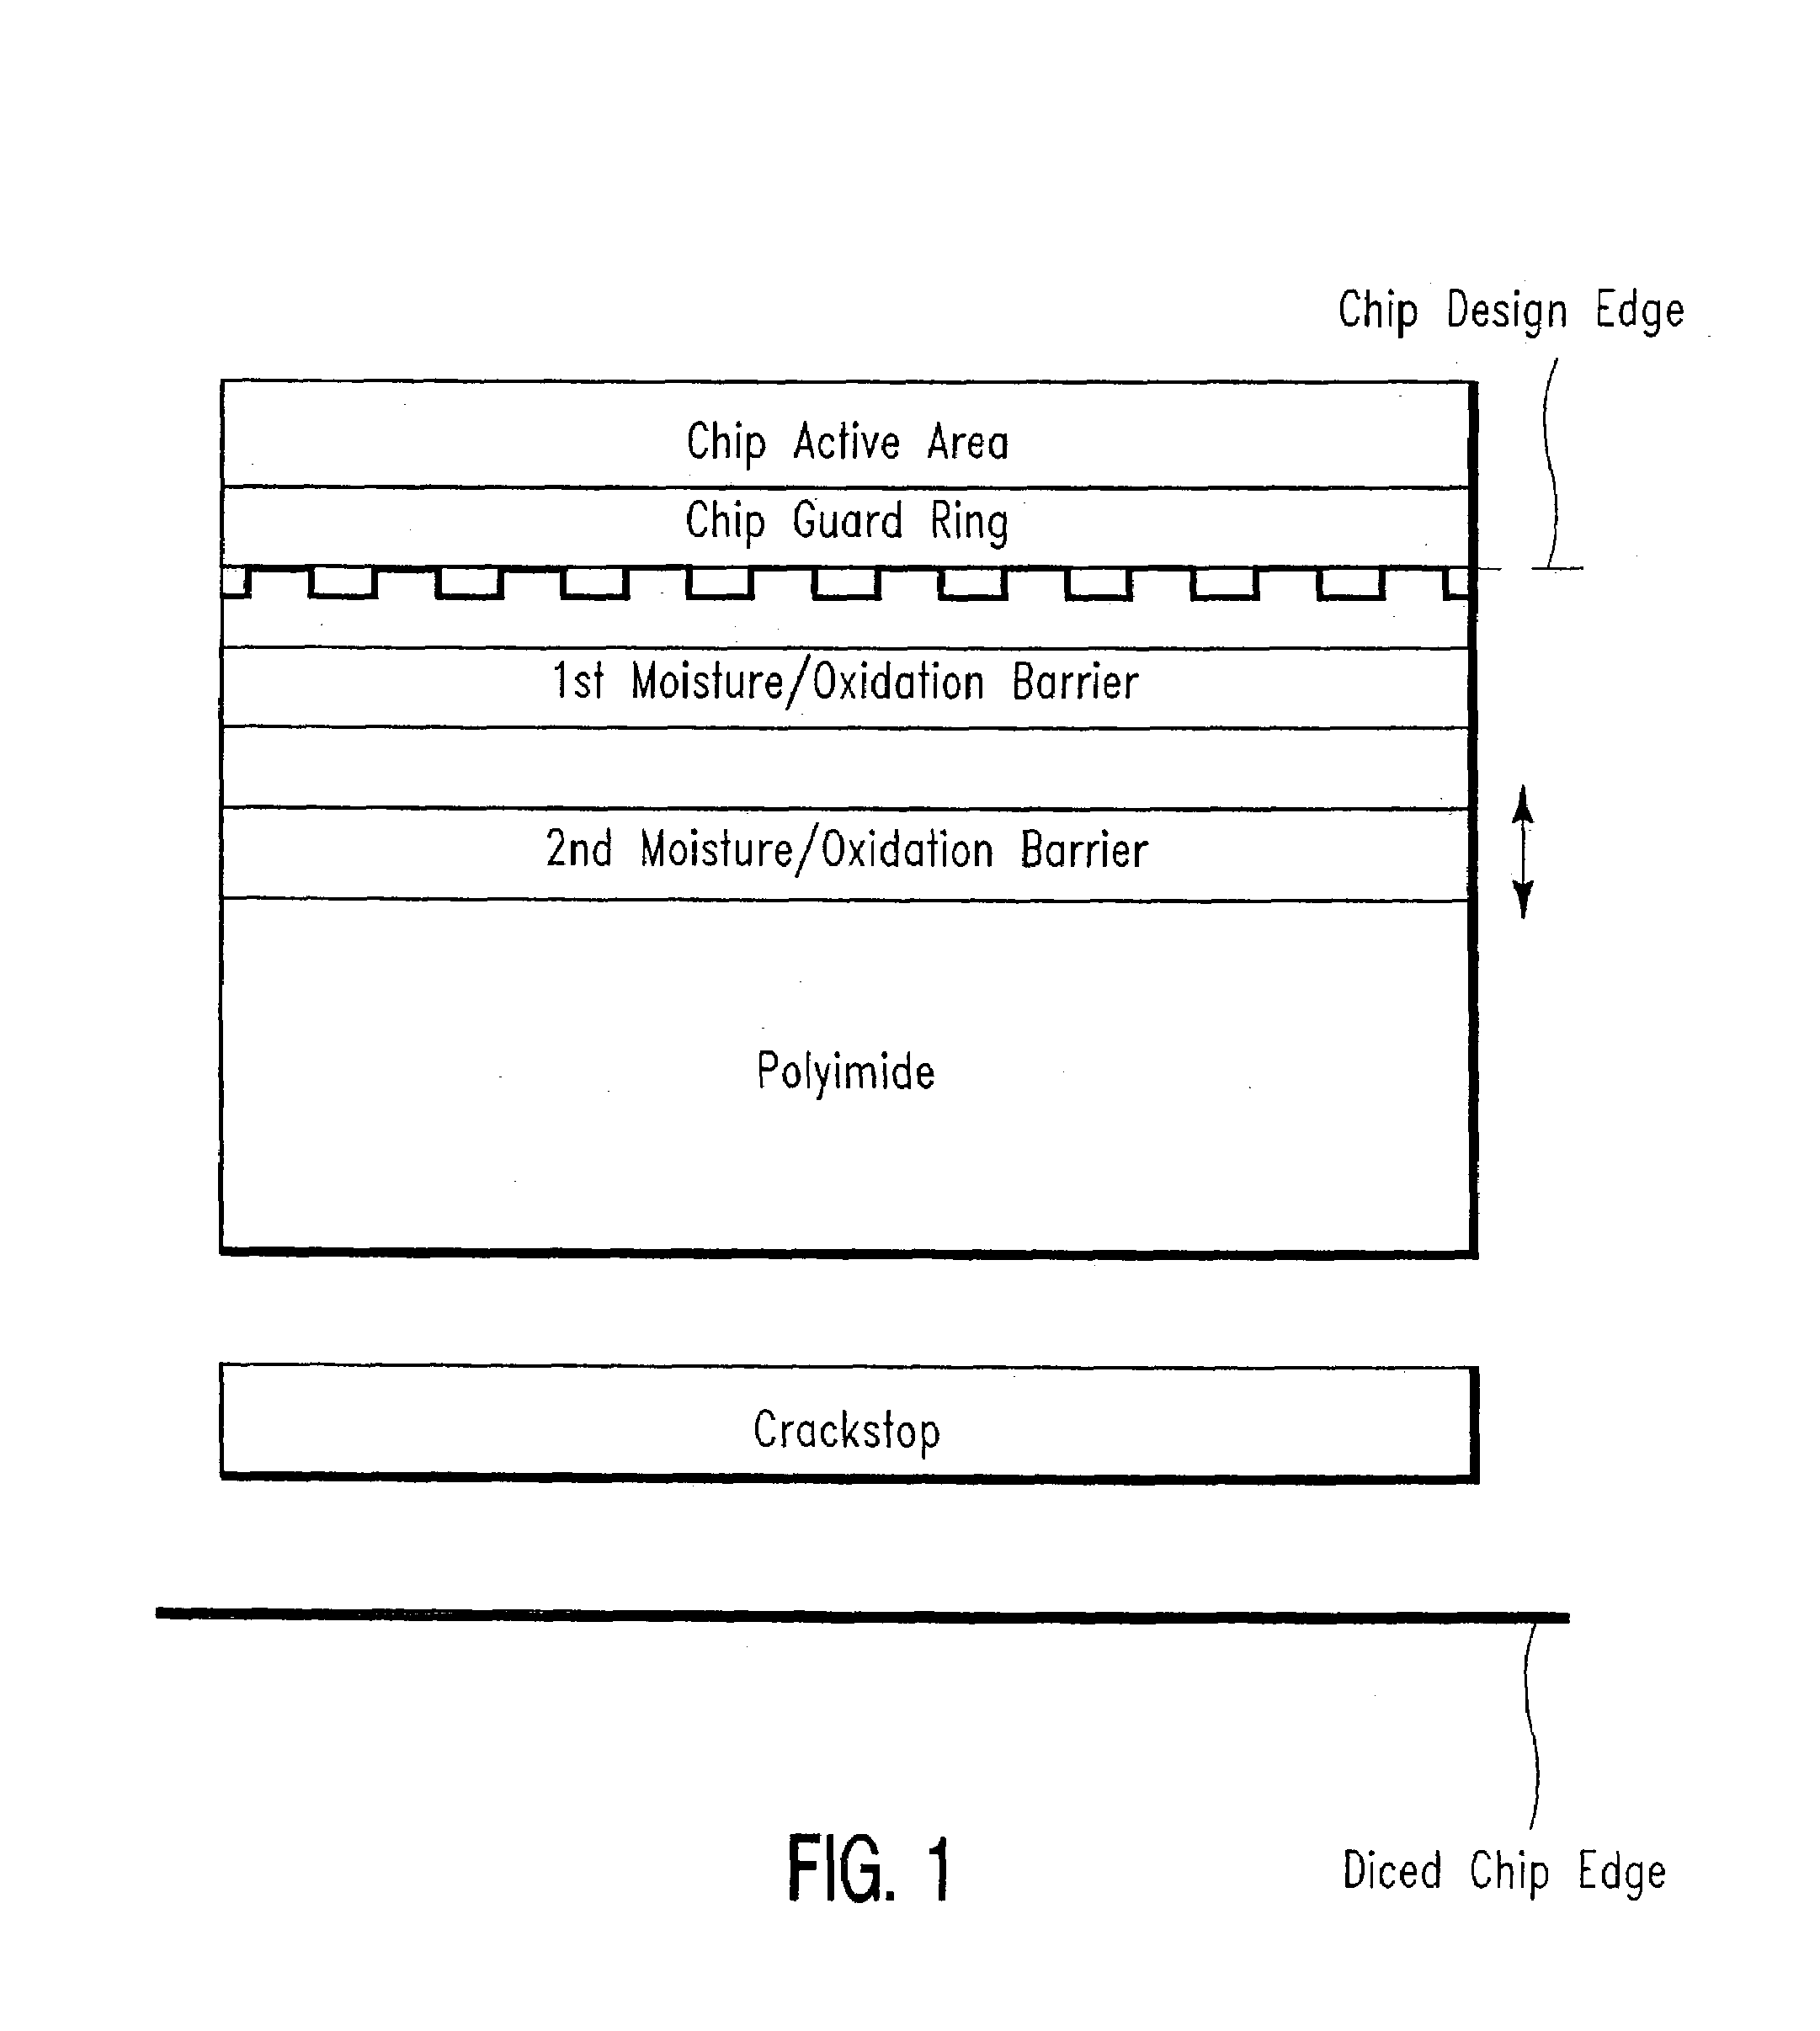 Multi-functional structure for enhanced chip manufacturibility and reliability for low k dielectrics semiconductors and a crackstop integrity screen and monitor